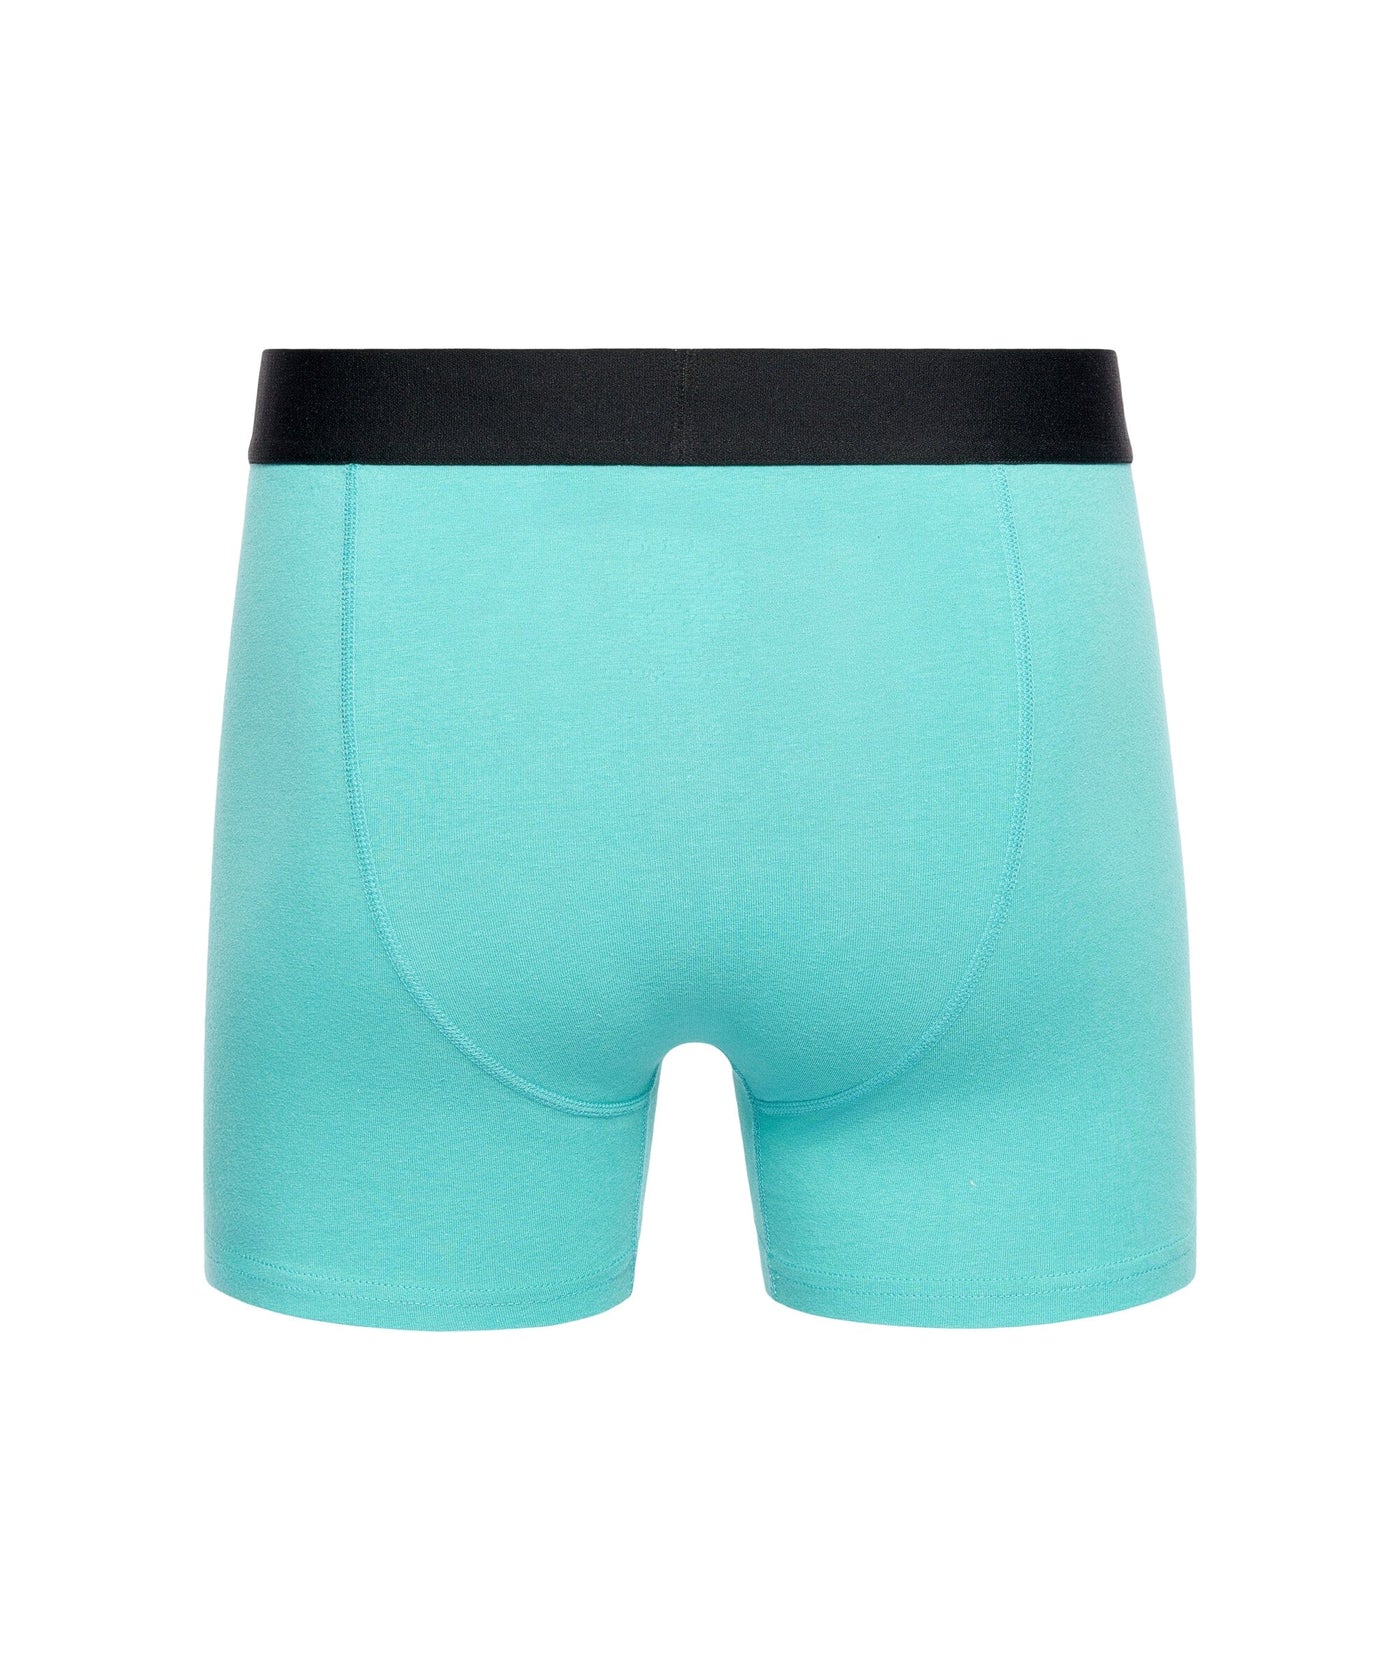 Chiller Boxers 5pk Assorted